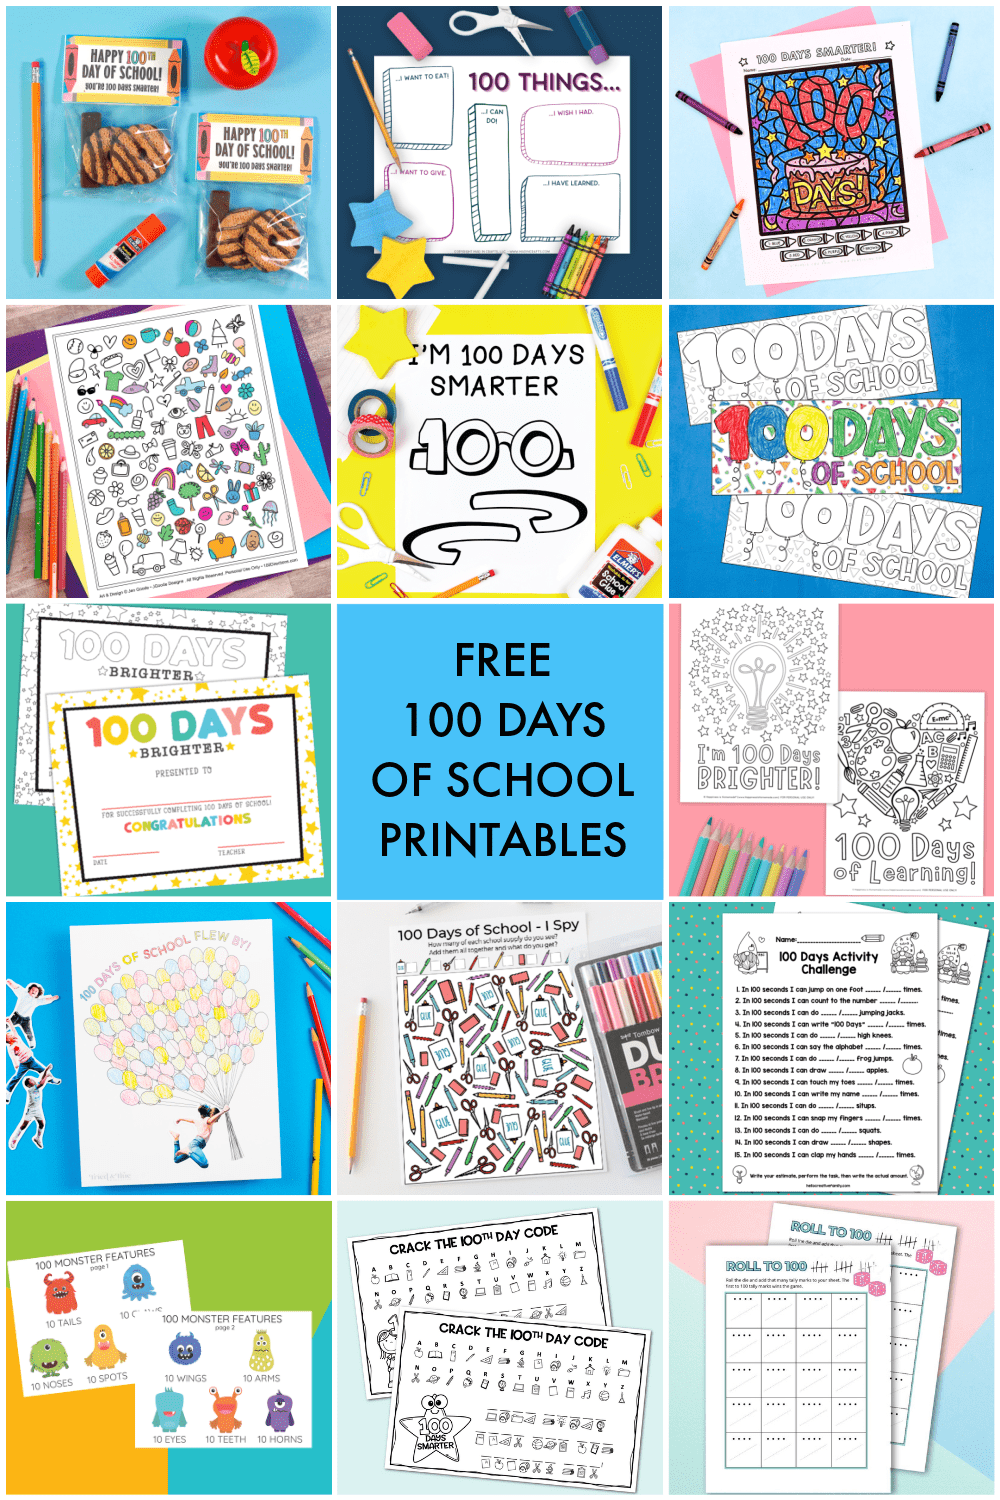 Collage of free 100 days of school printables